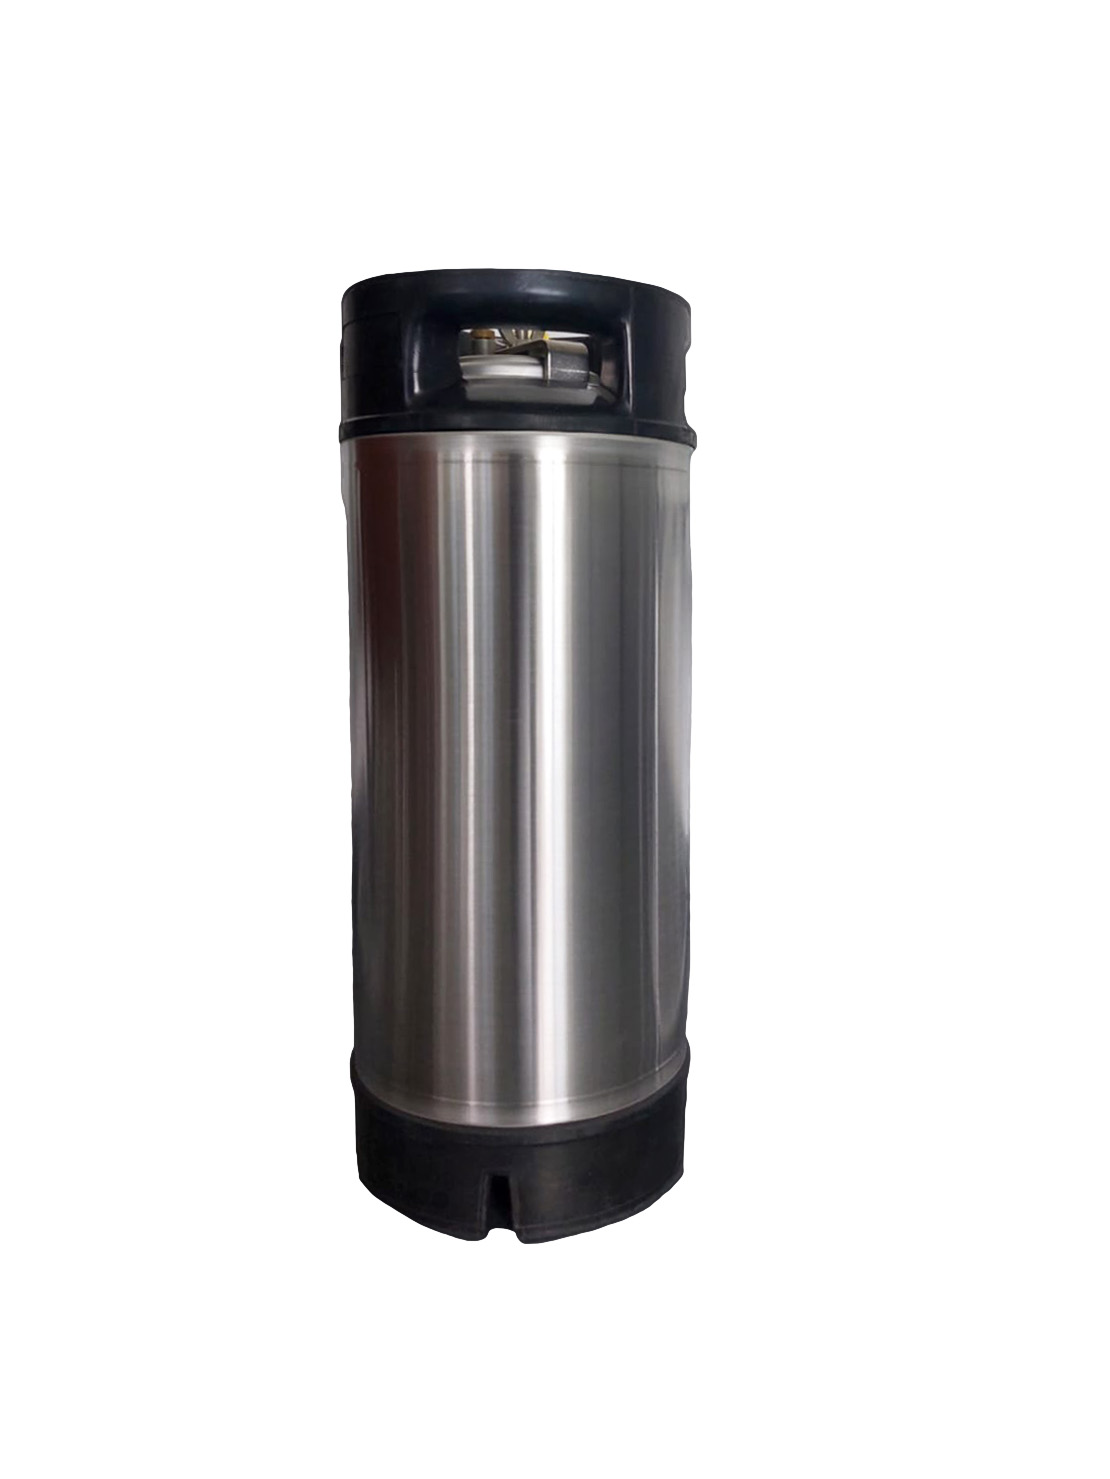 12 Liter Stainless Steel Mixed Bed Demineralization Cartridge Filled with Premium Resin